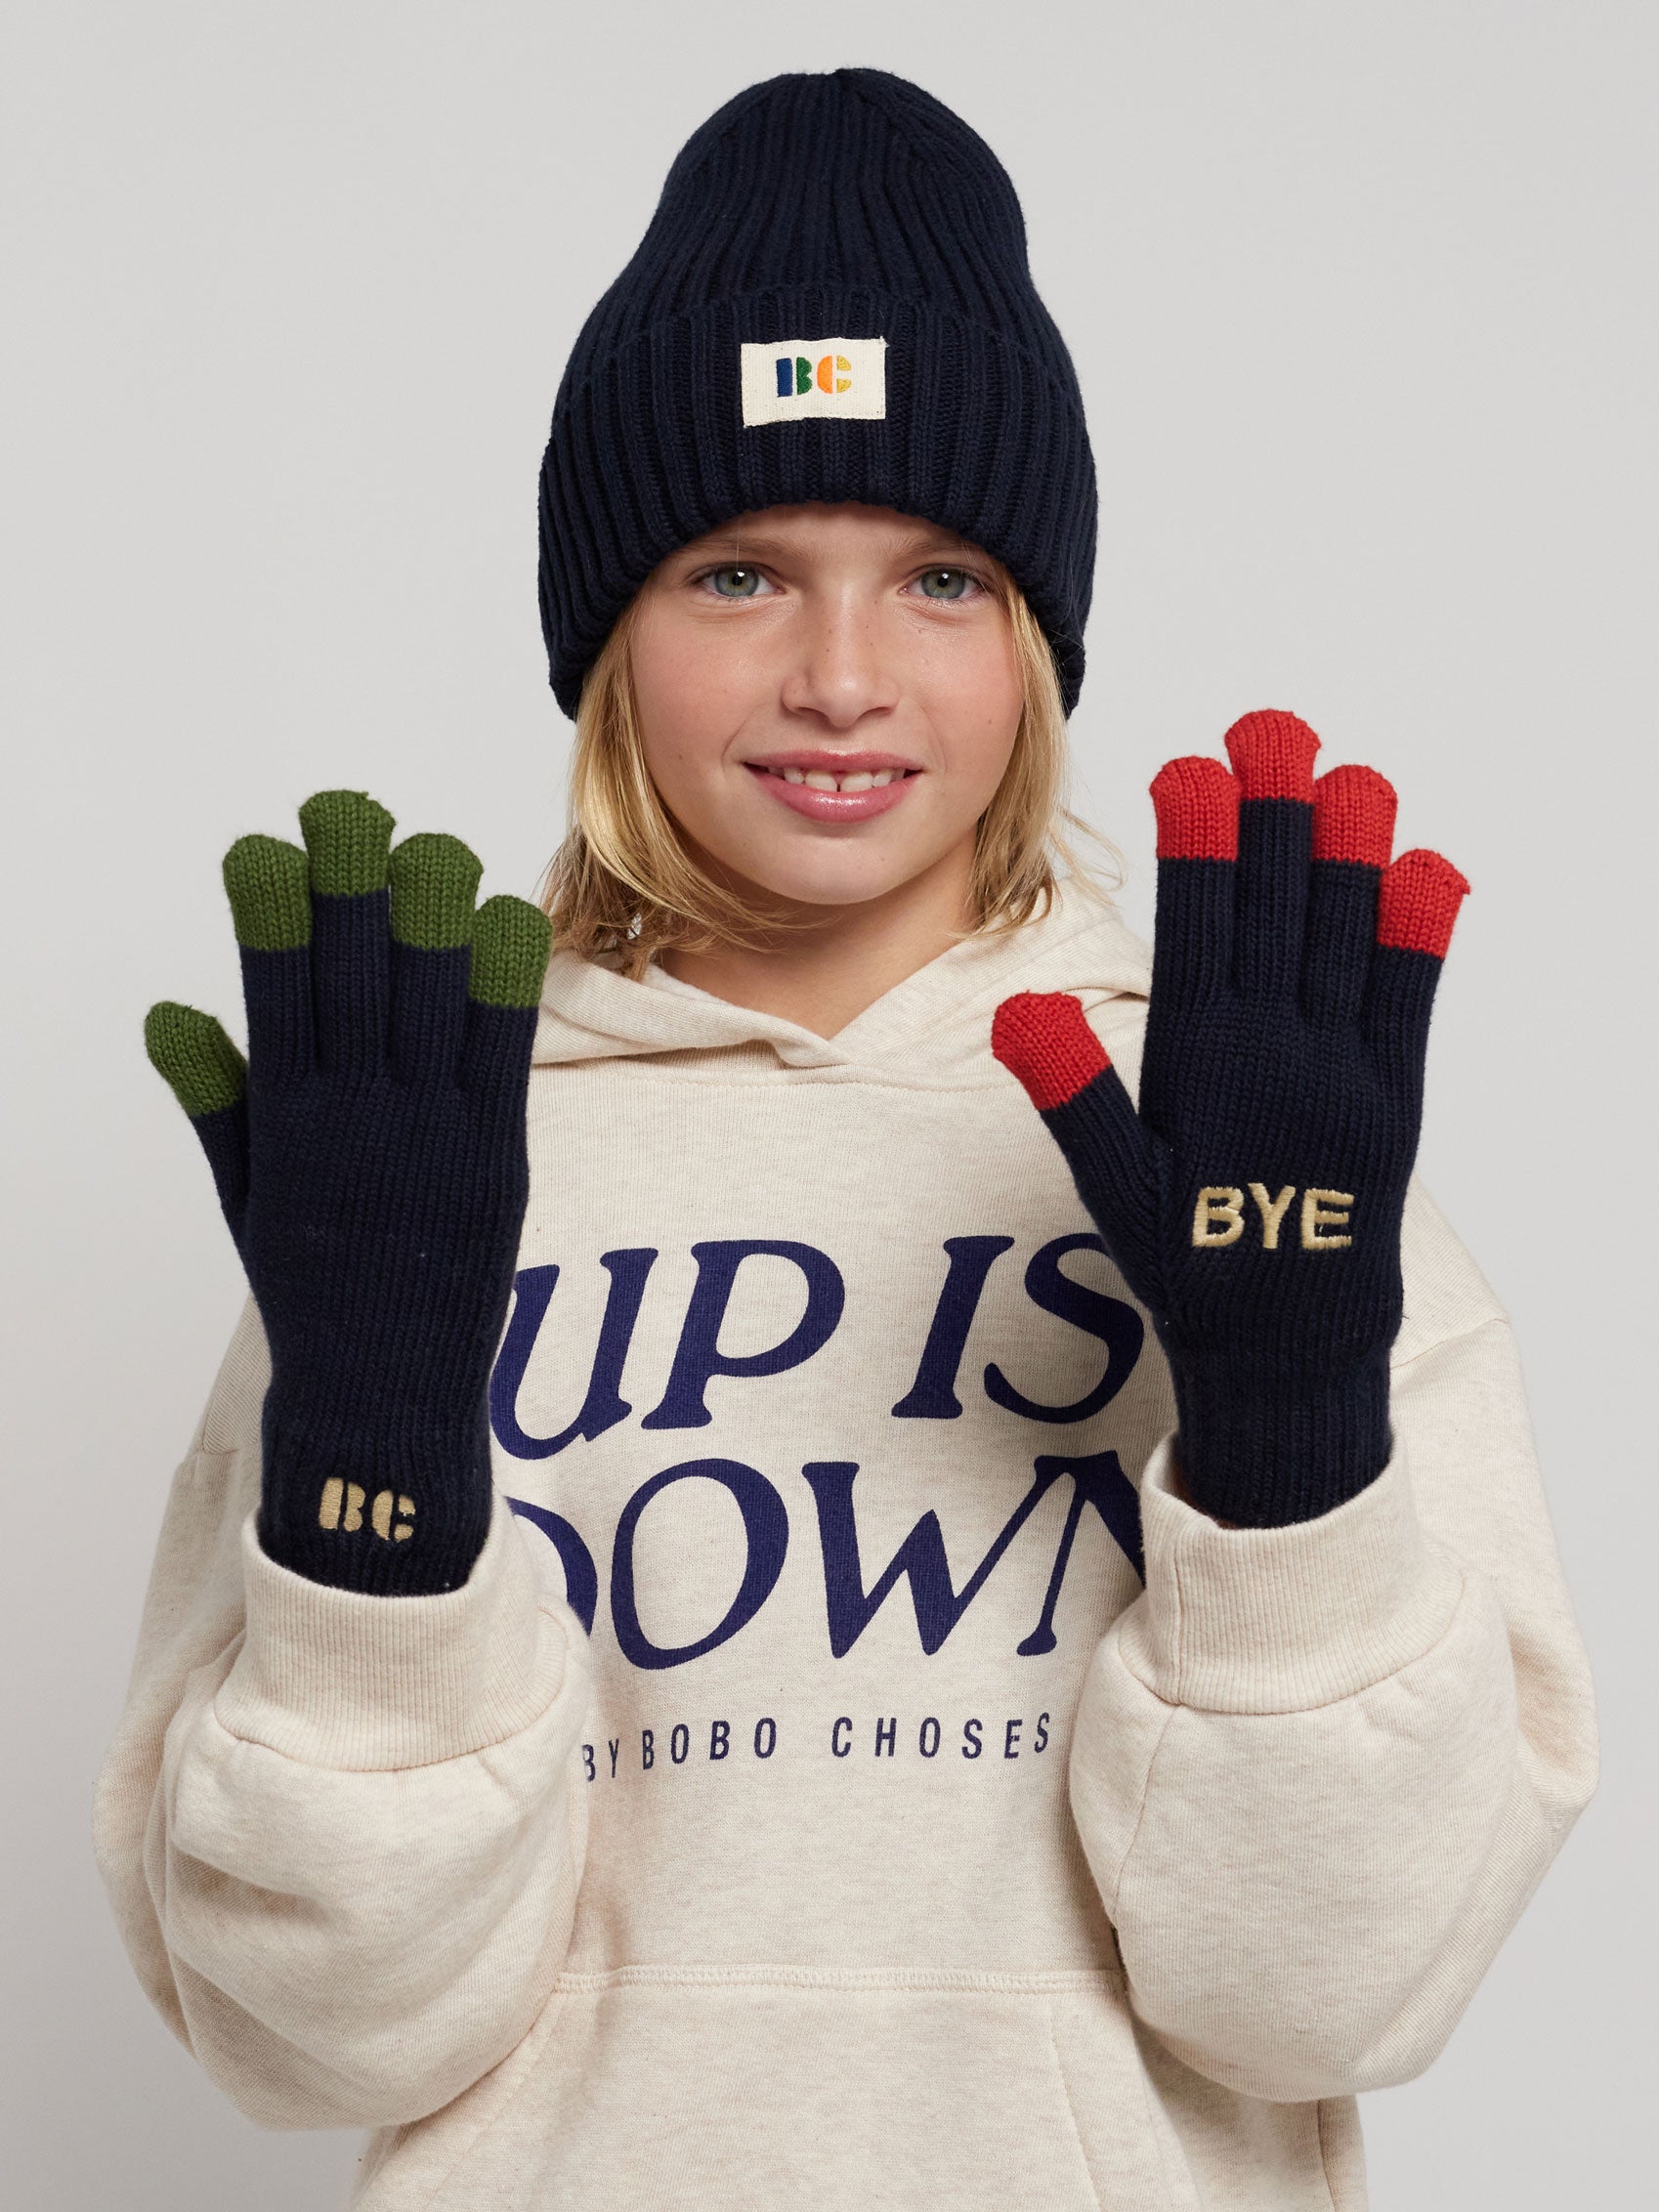 Colored Fingers Choses – Bobo knitted gloves BC